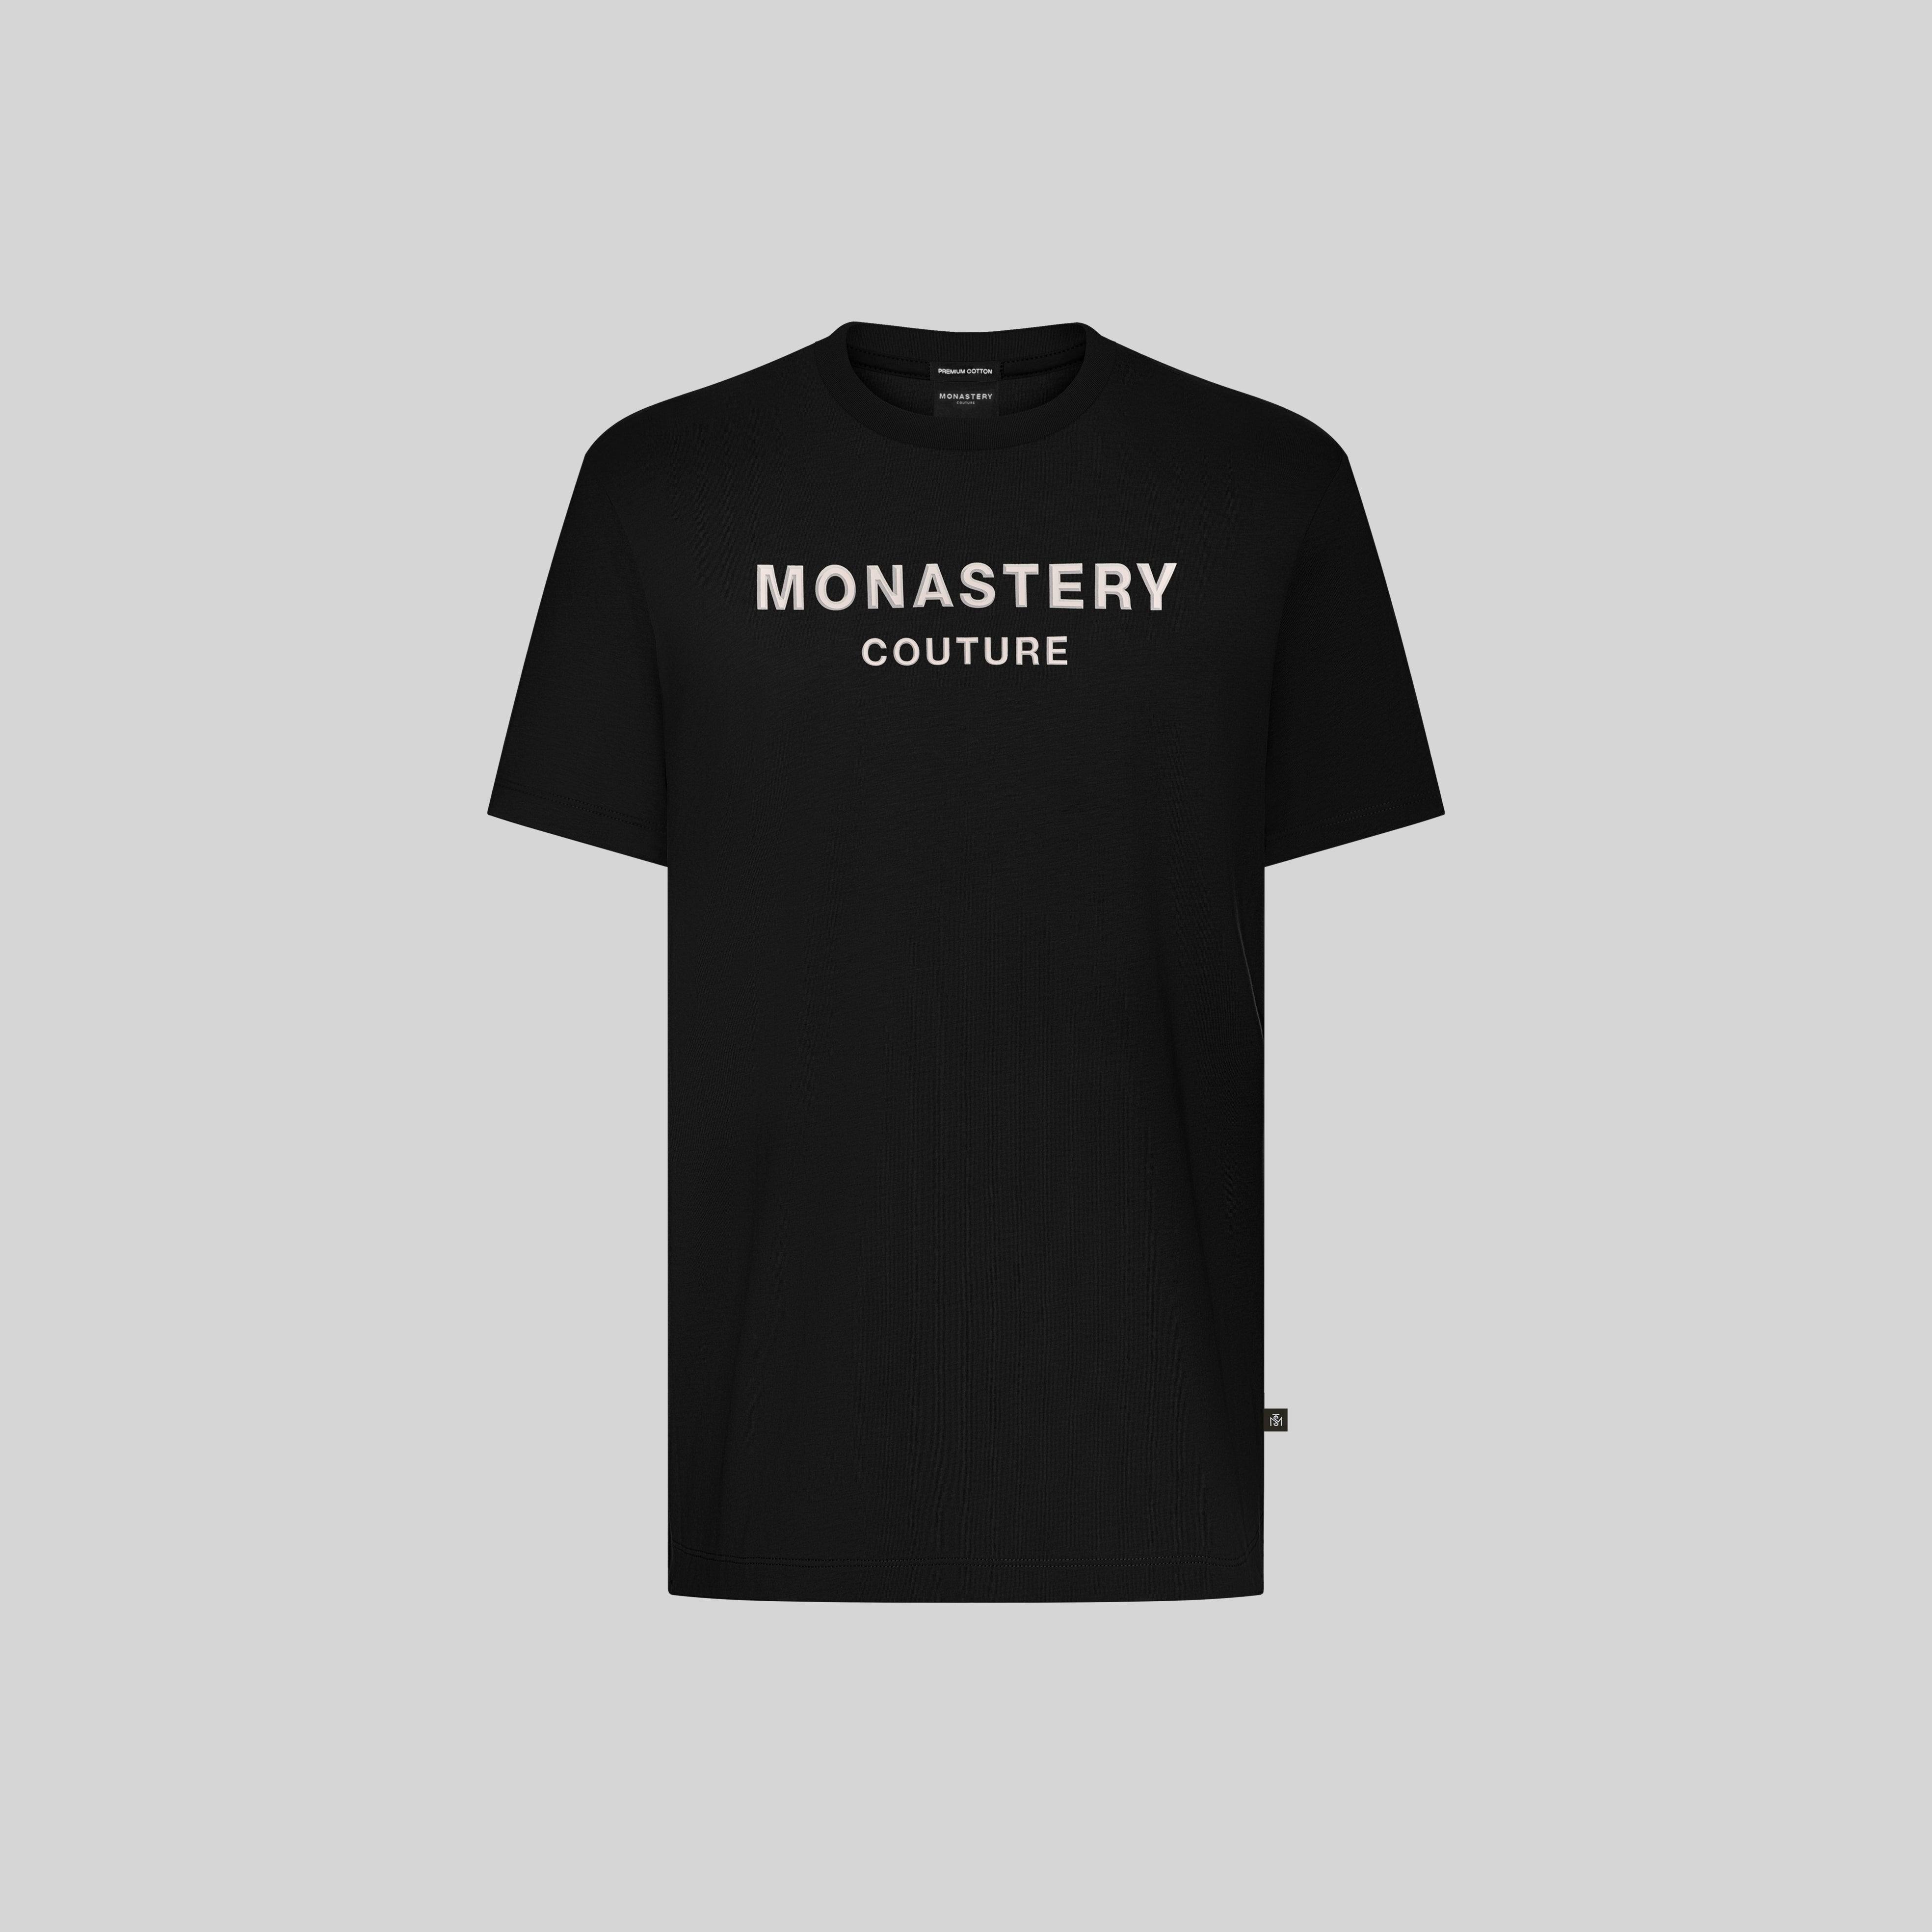 BLACK DAYS – Monastery Couture